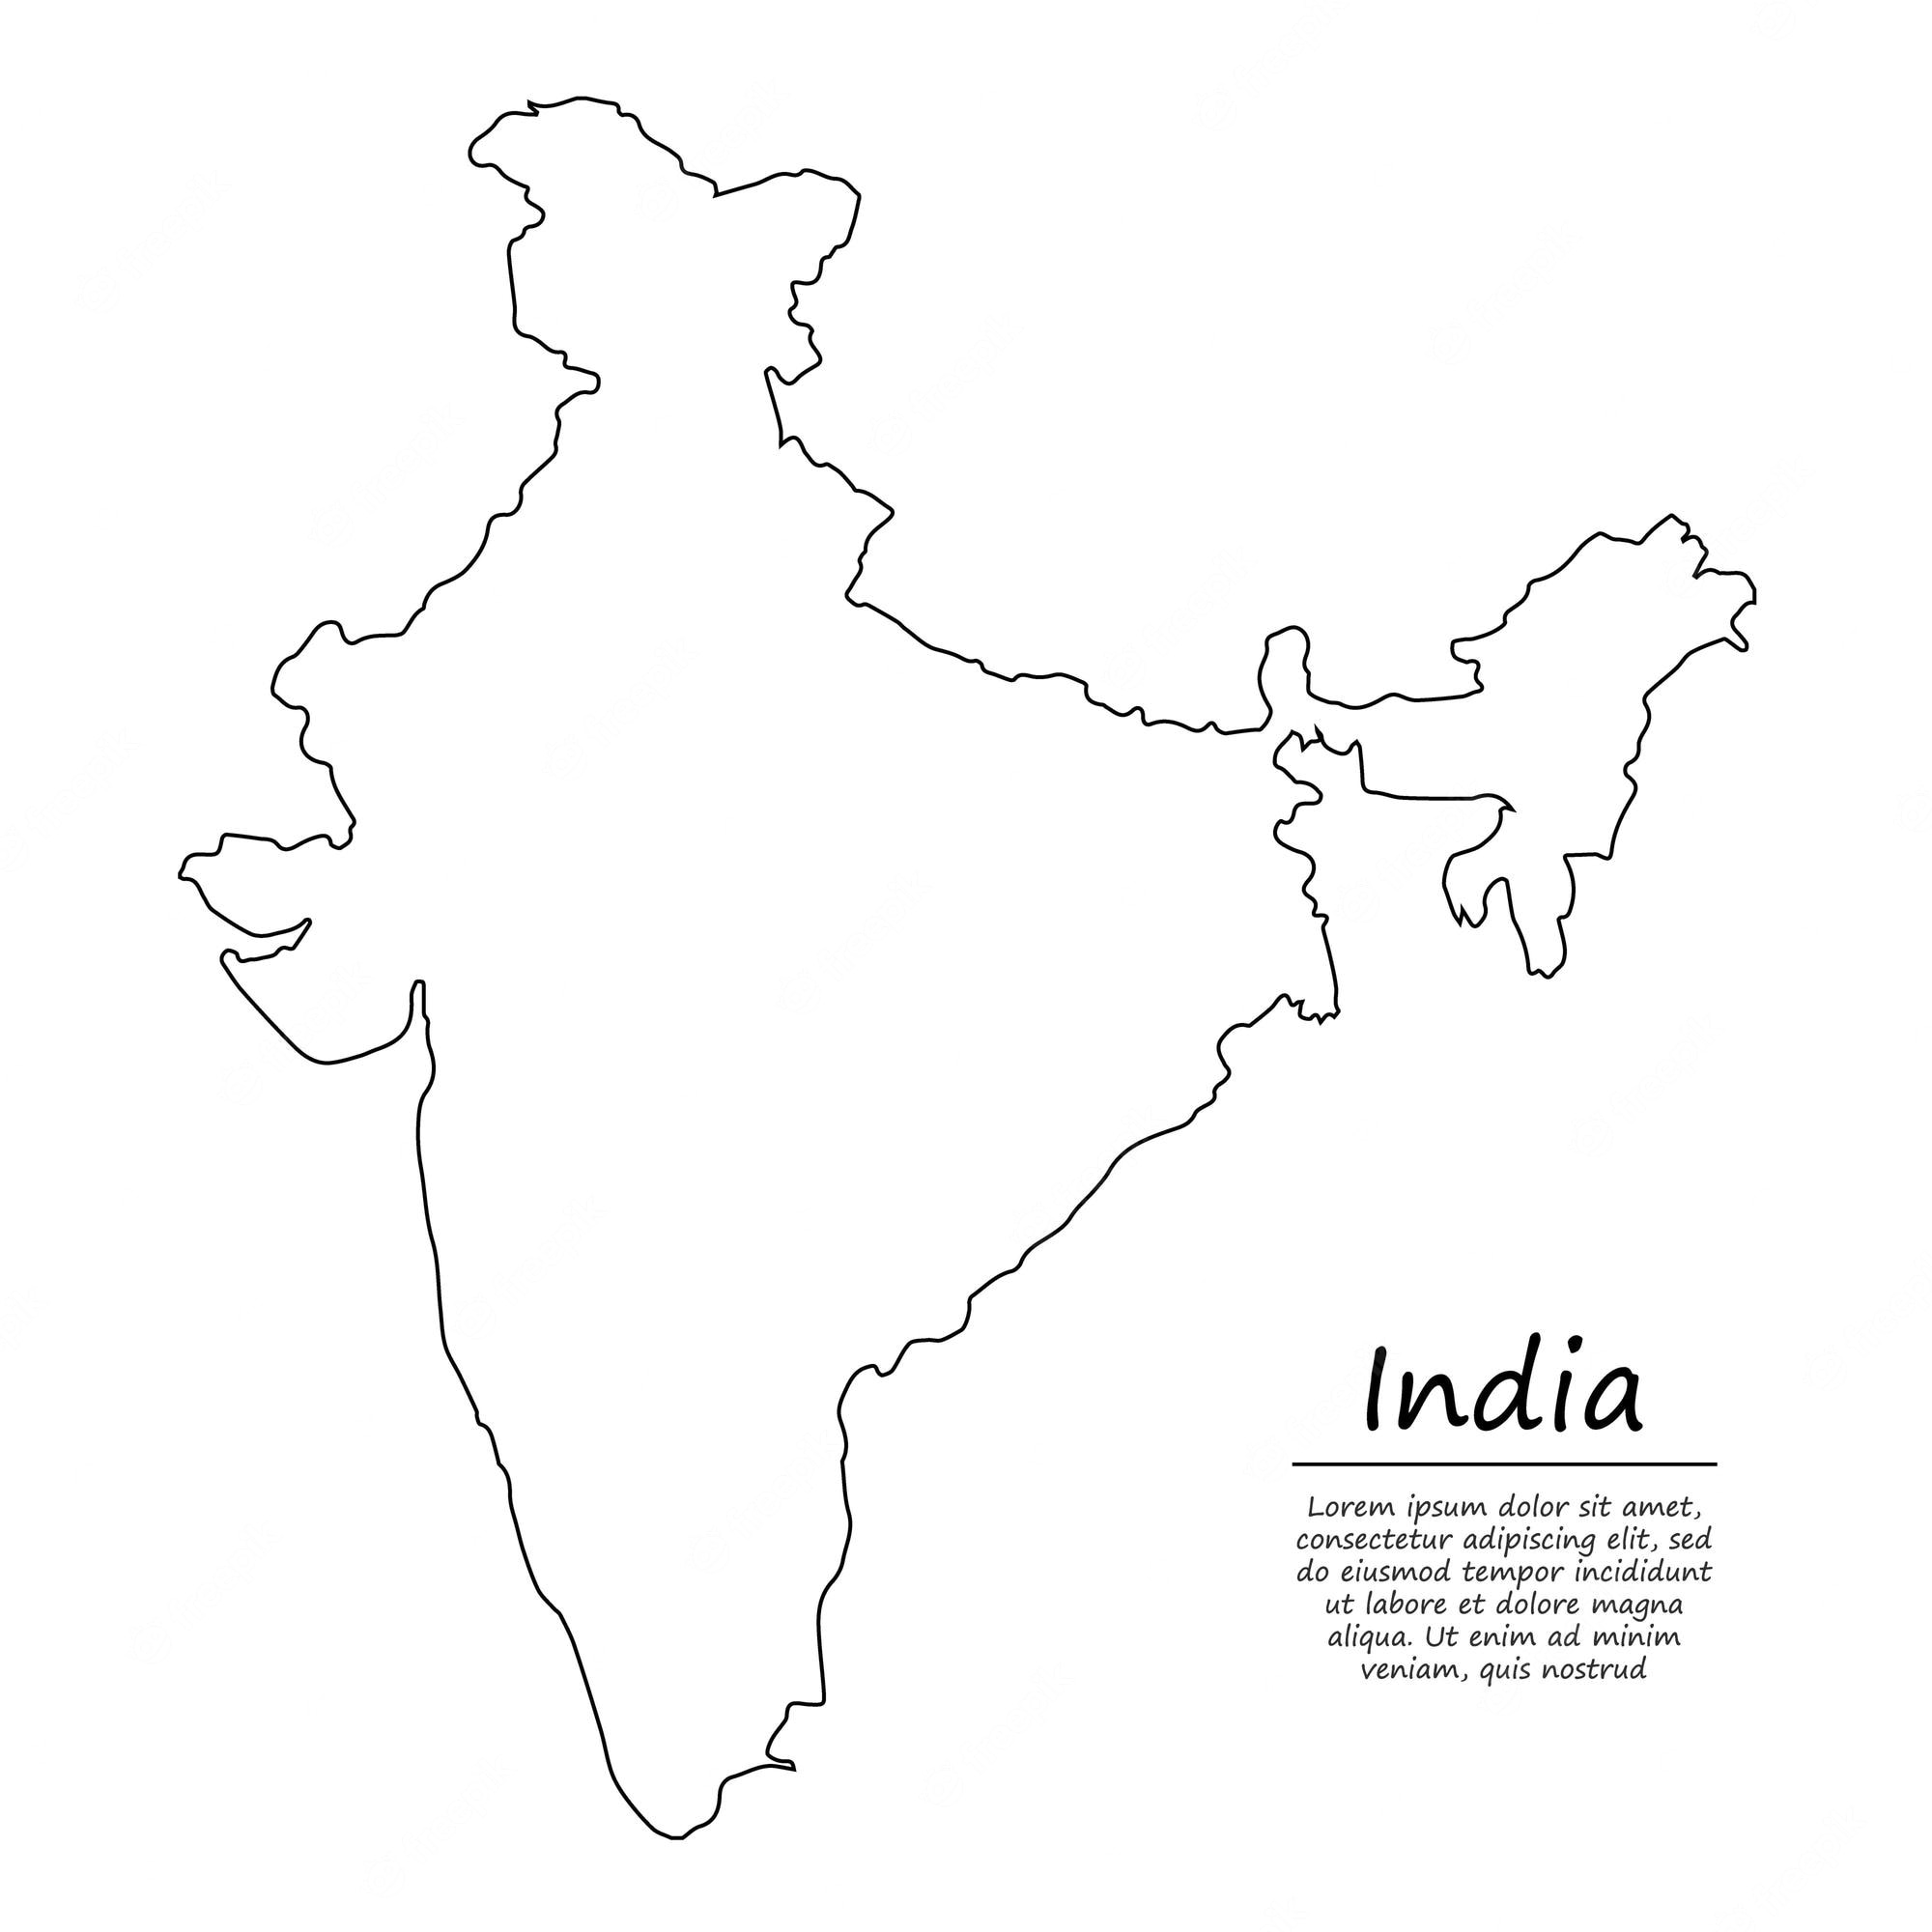 258 India Map Draw Stock Video Footage - 4K and HD Video Clips |  Shutterstock